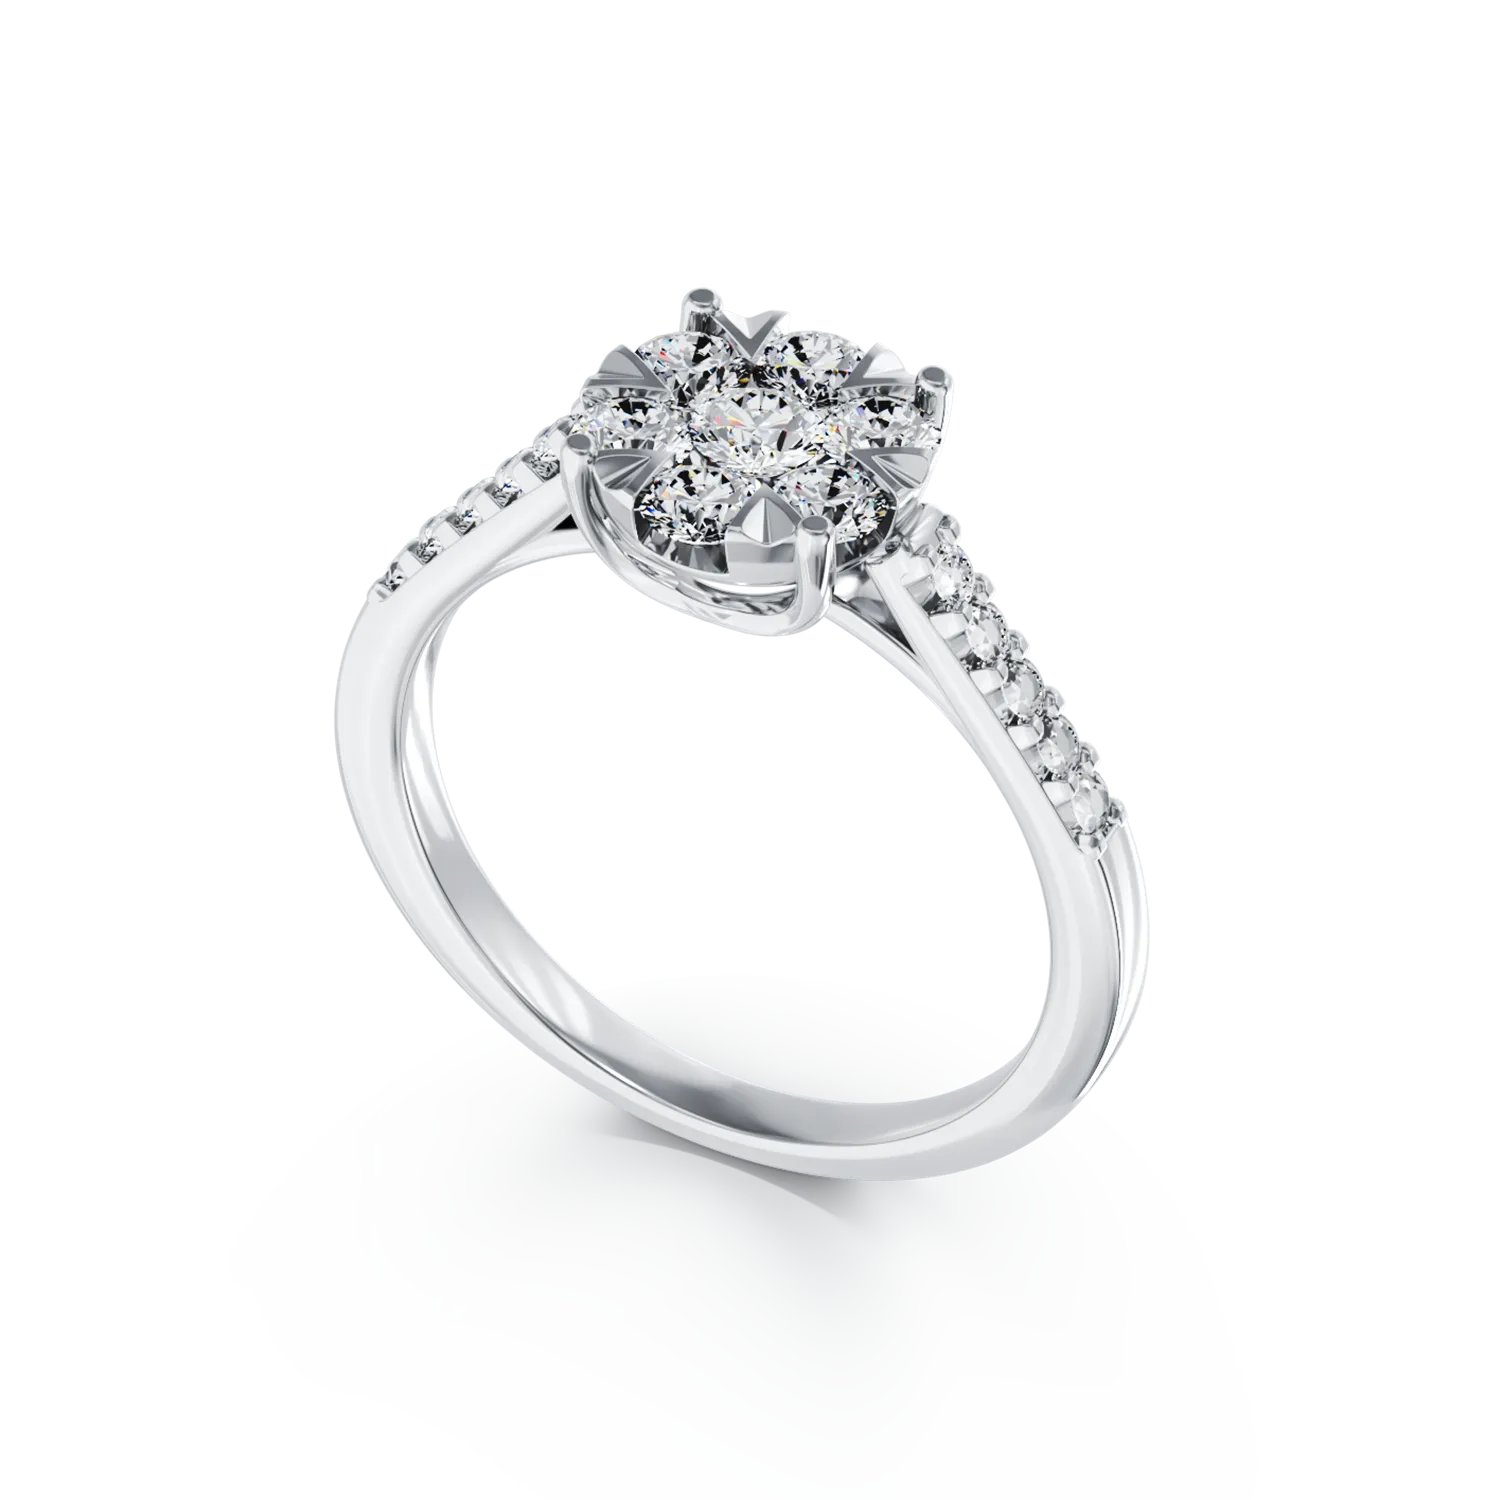 White gold engagement ring with 0.5ct diamonds